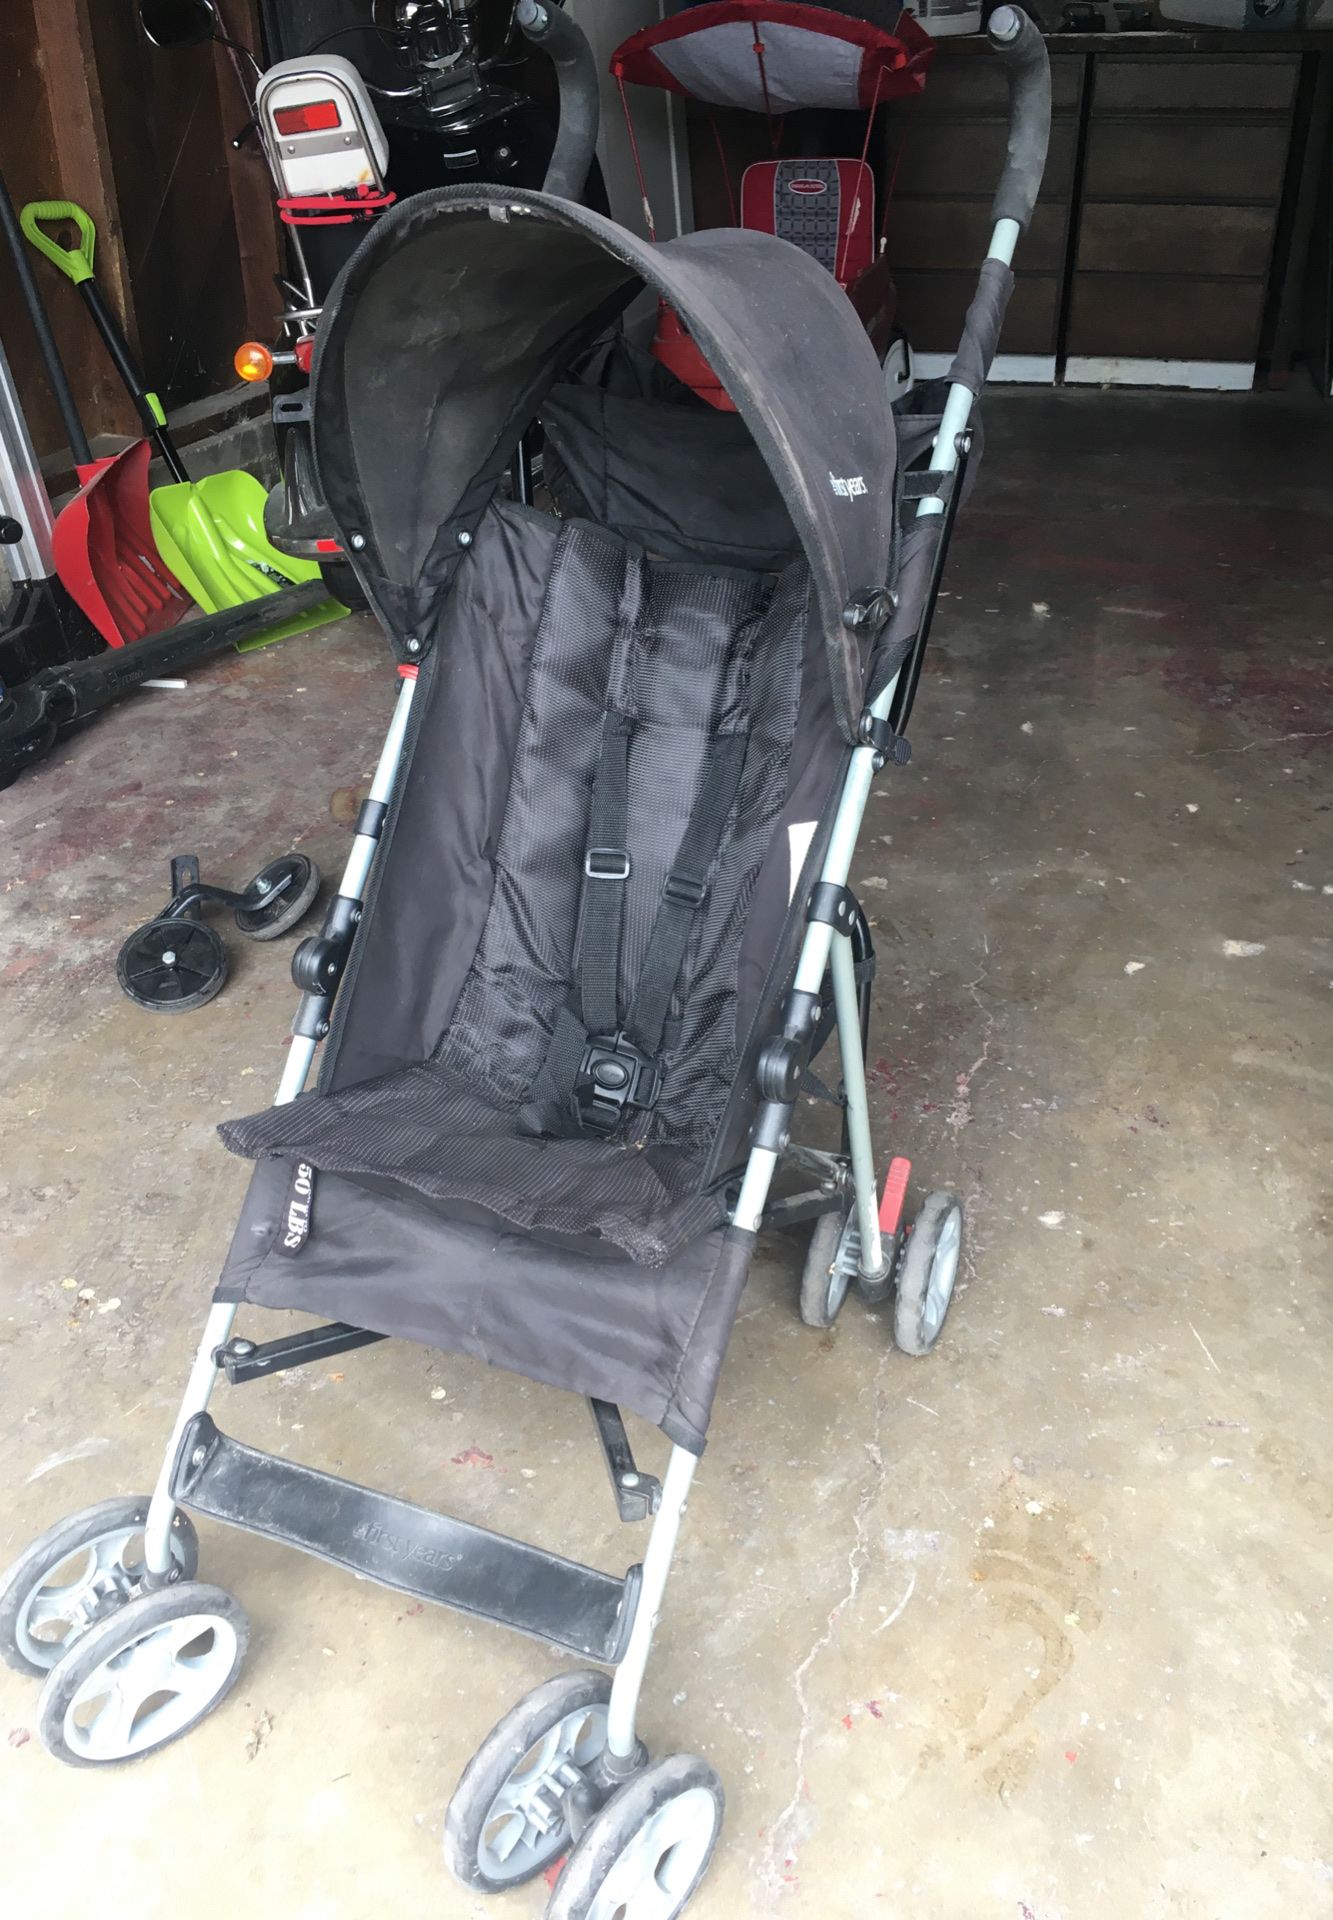 The first years Umbrella stroller